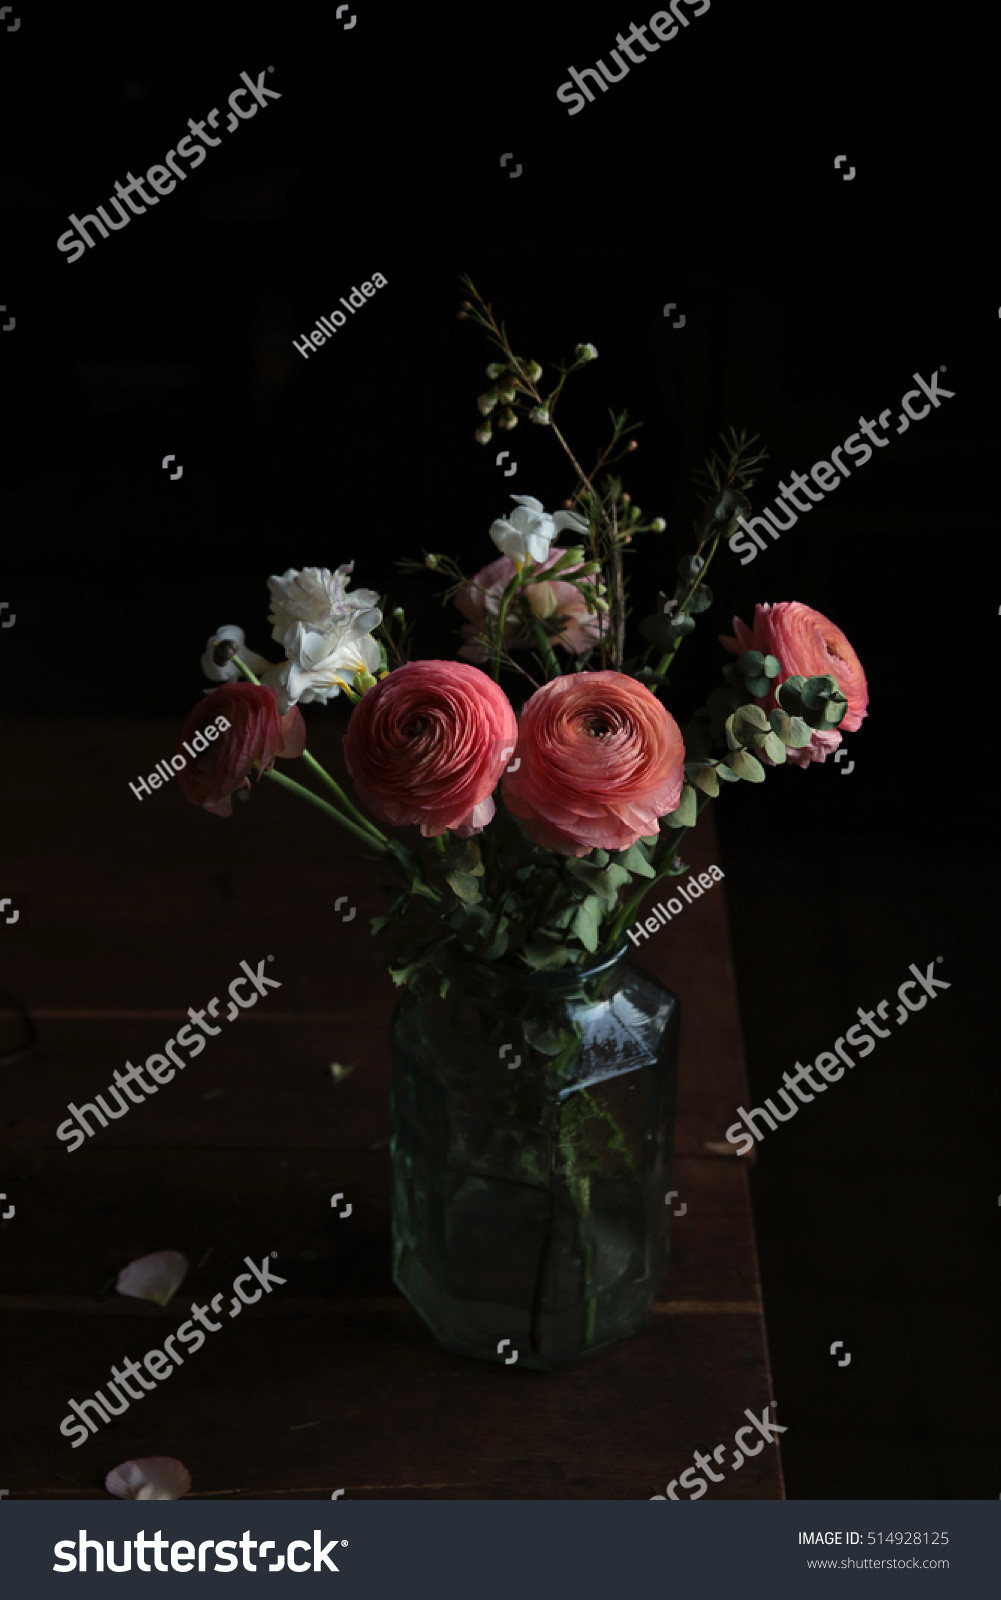 14 Awesome Flowers In Small Glass Vases 2024 free download flowers in small glass vases of flower bouquet glass vase on vintage stock photo edit now with regard to flower bouquet in a glass vase on vintage table with black moody background